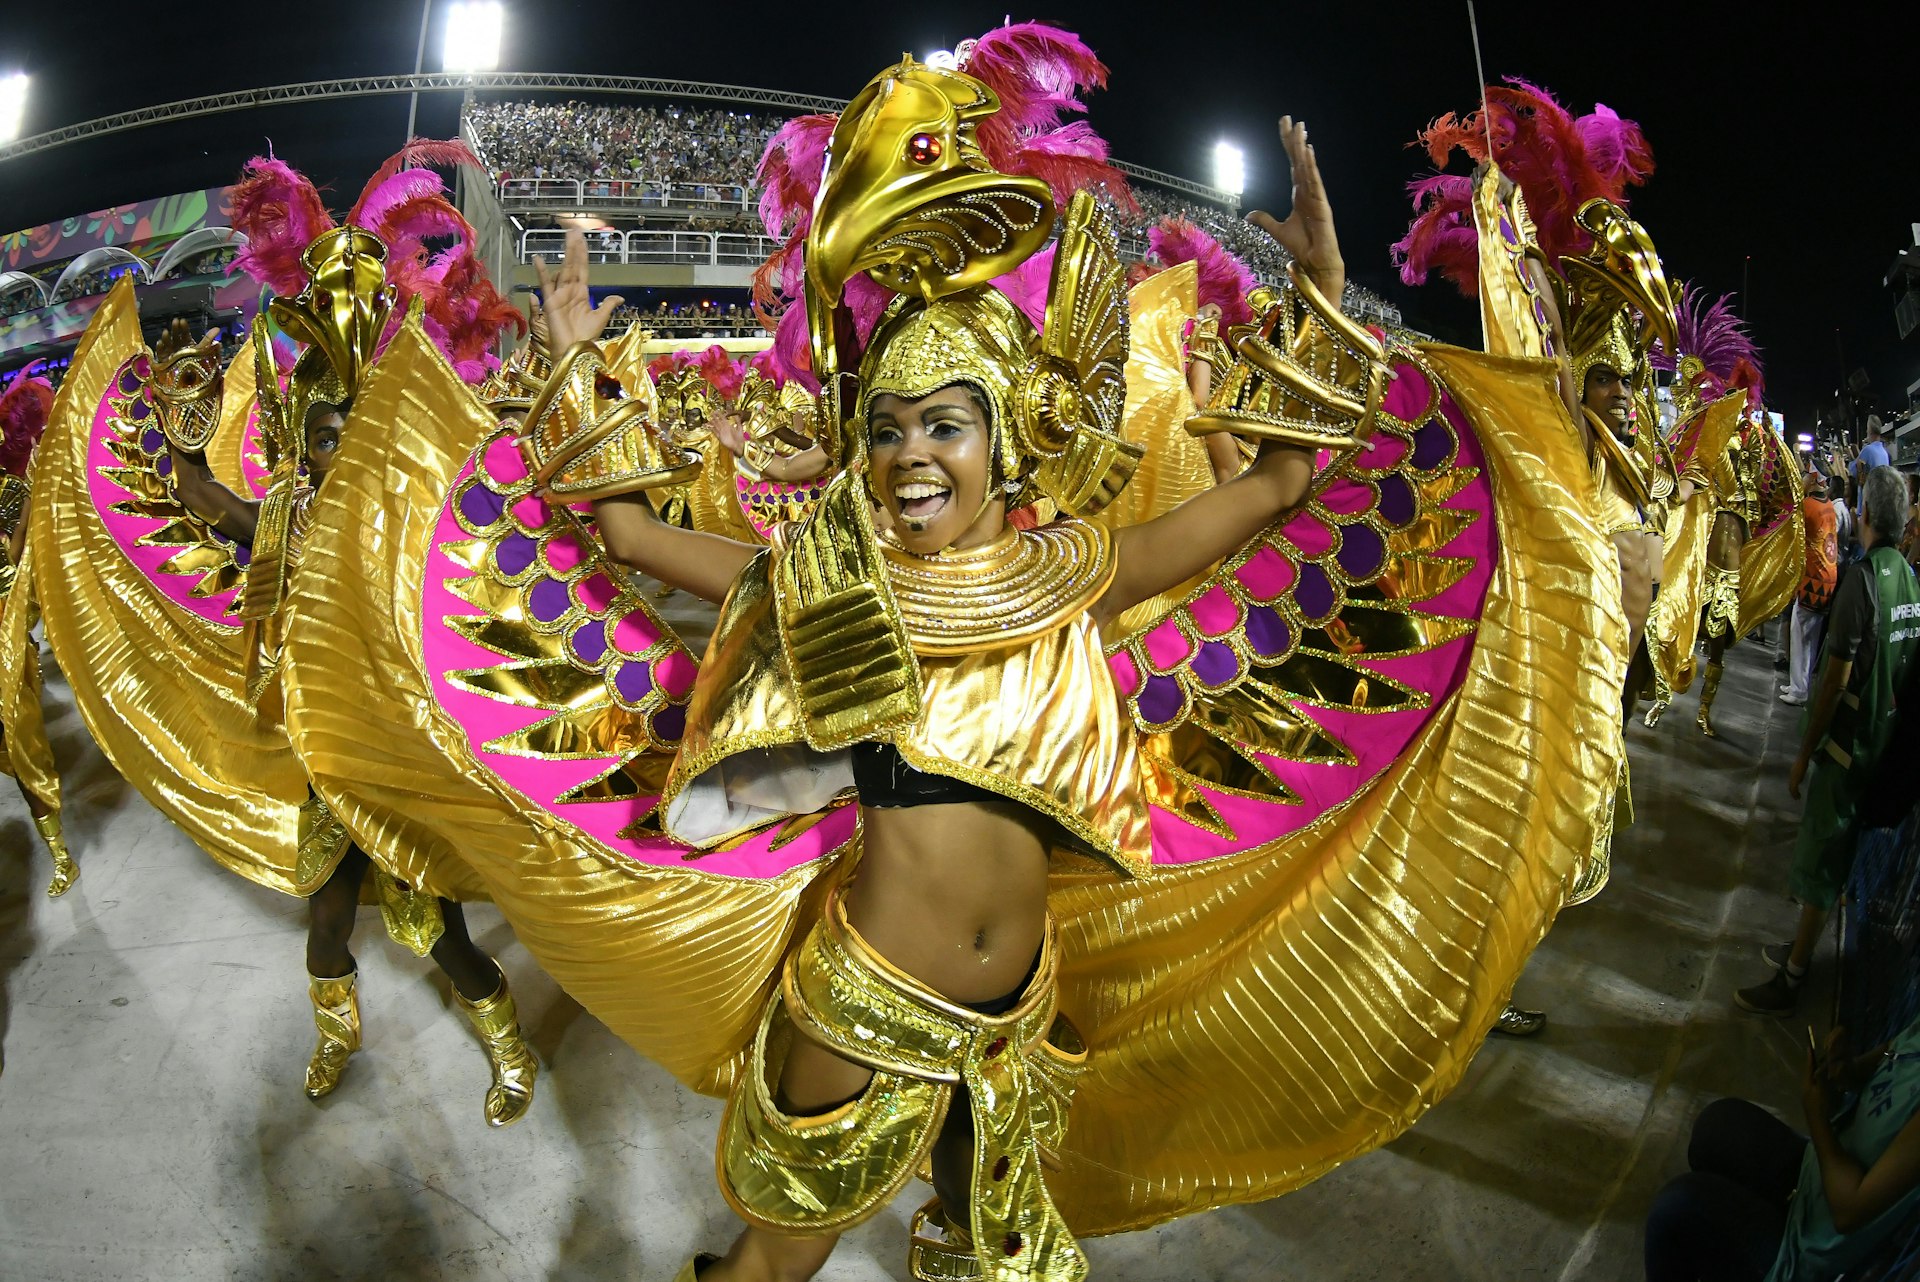 Women dance in elaborate gold costumes at the Parade of the Samba Schools of the Special Group during the Carnival of Rio de Janeiro